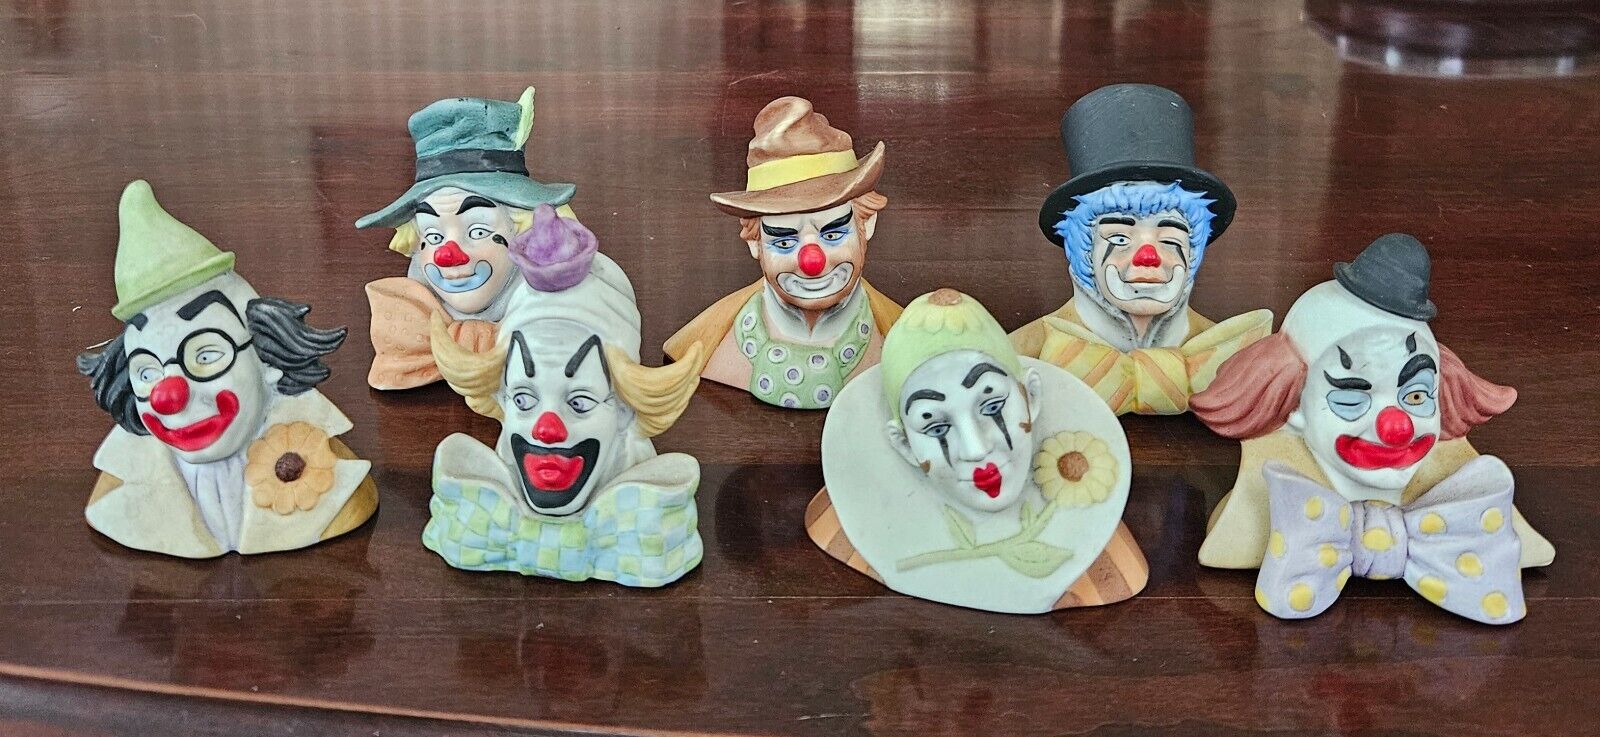 Reco Clown Collection Figurines, 1984